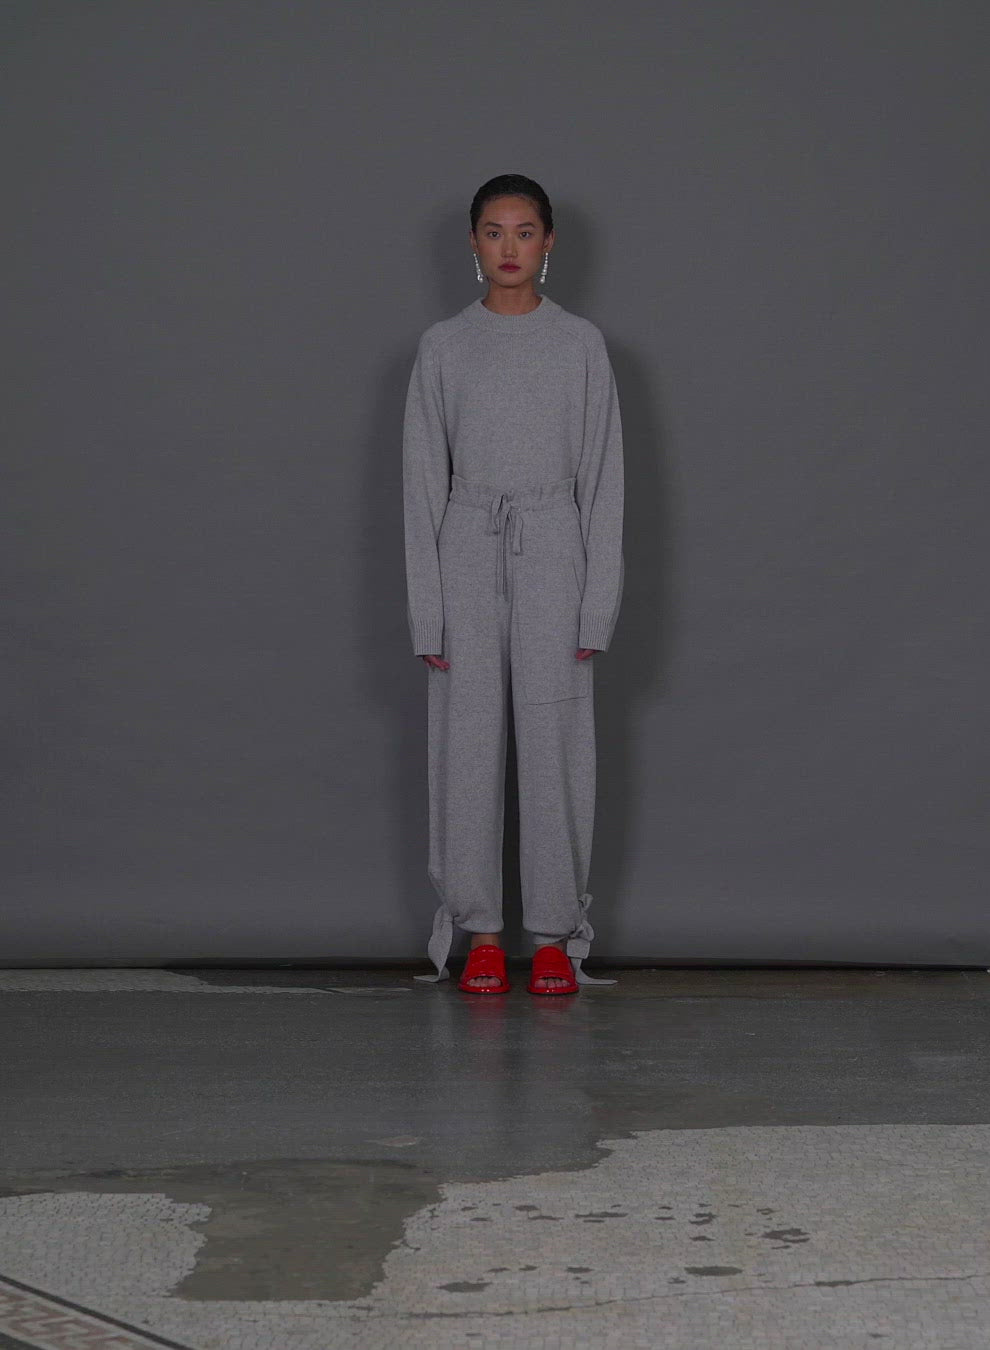 Model wearing the cashmere tie lounge sweatpants walking forward and turning around